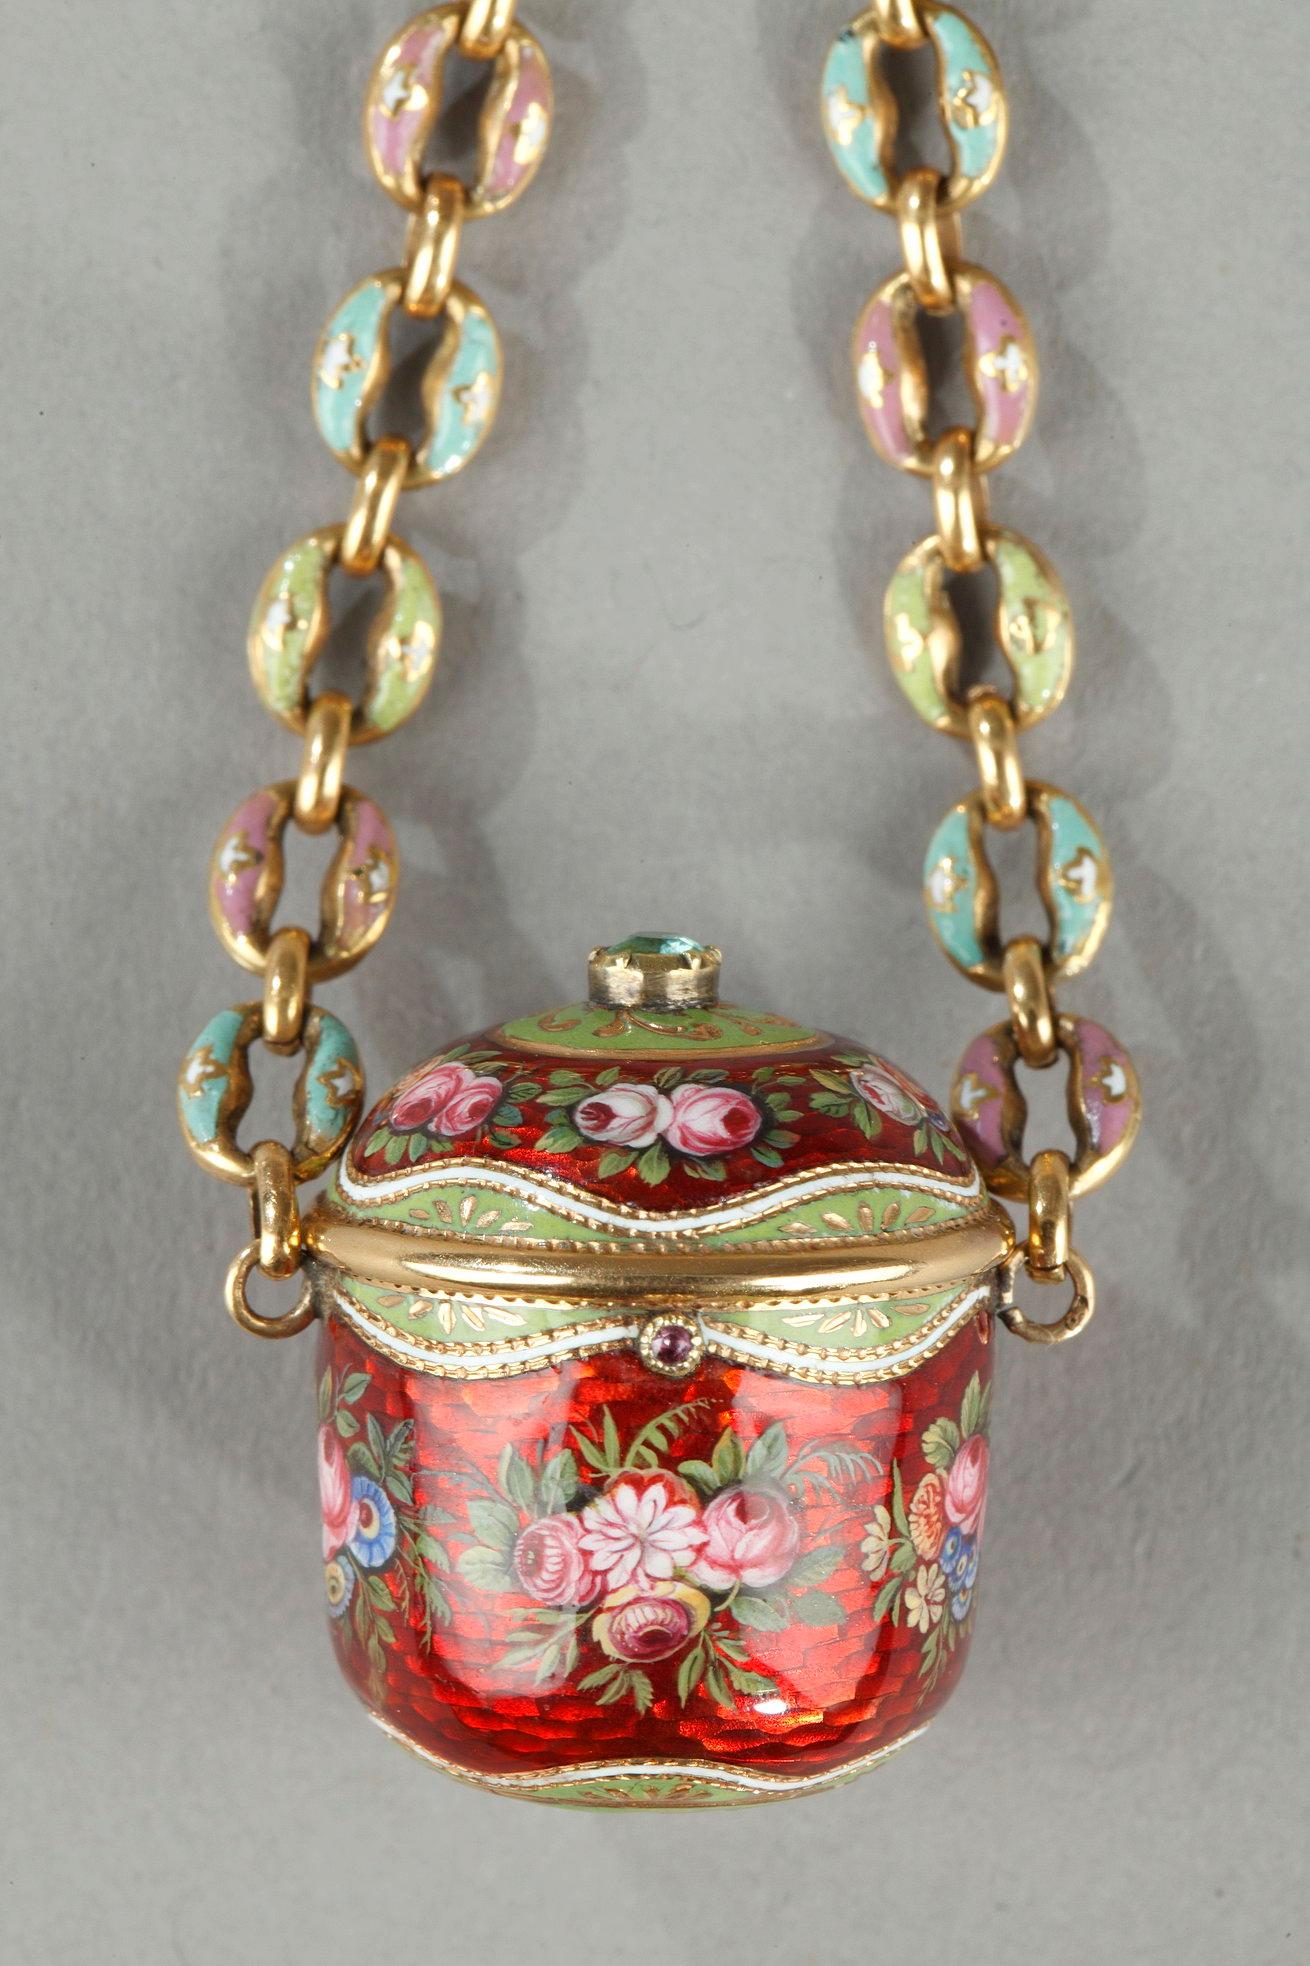 Neoclassical Early 19th Century Gold and Enamel Vinaigrette, Chain, and Ring, circa 1820 For Sale